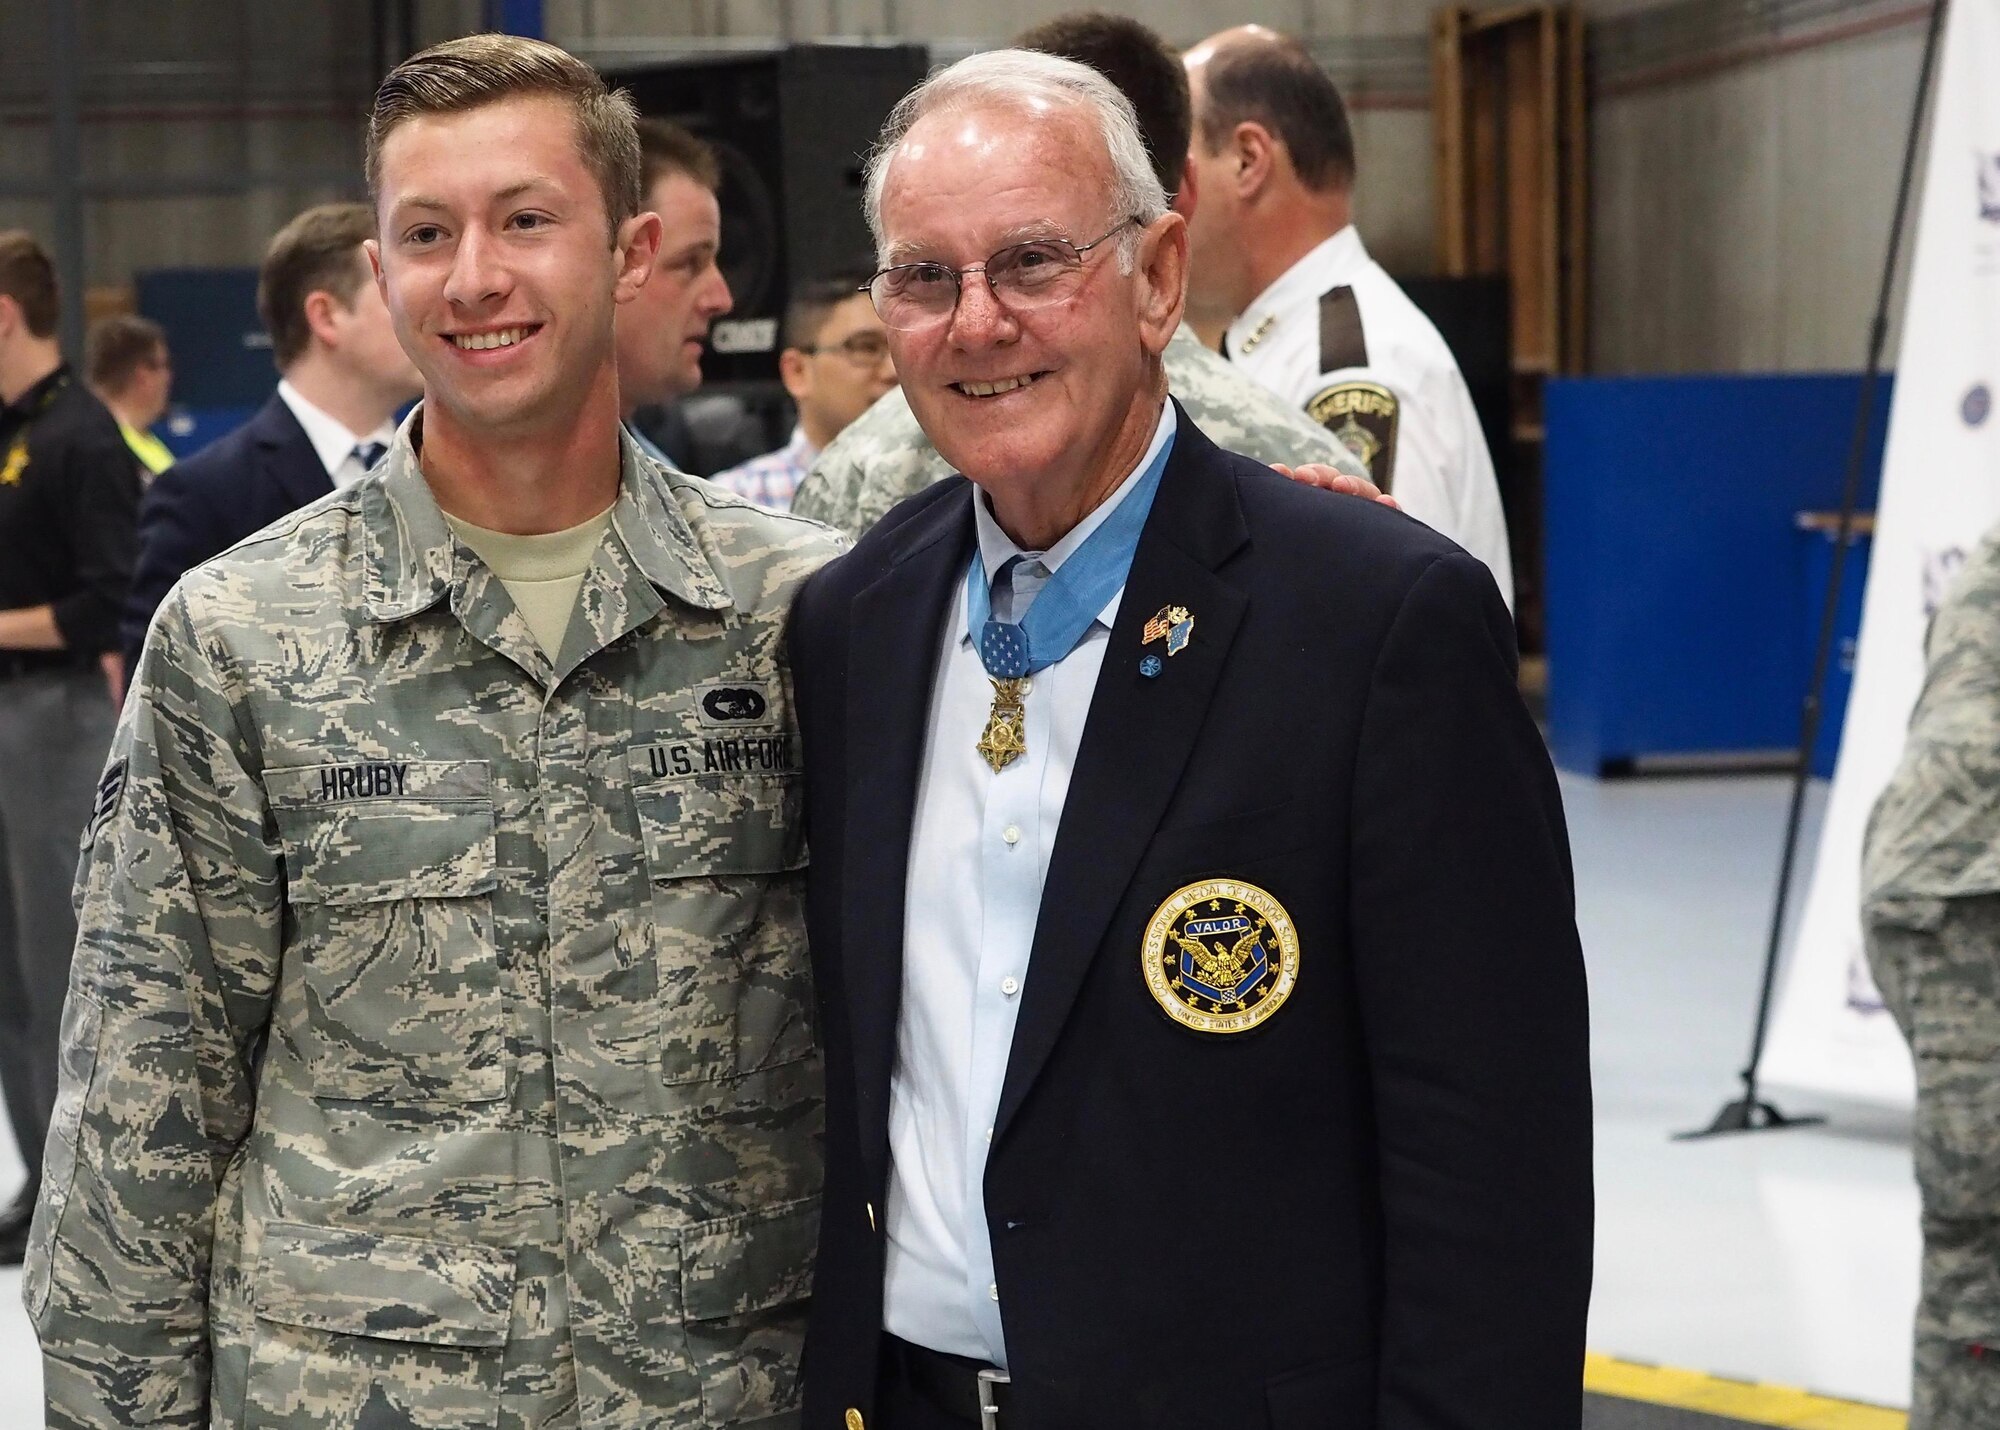 Senior Airman Justin Hruby, 27th Aerial Port Squadron, poses for a photo with Medal of Honor recipient Robert Patterson. (Air Force Photo/Paul Zadach)